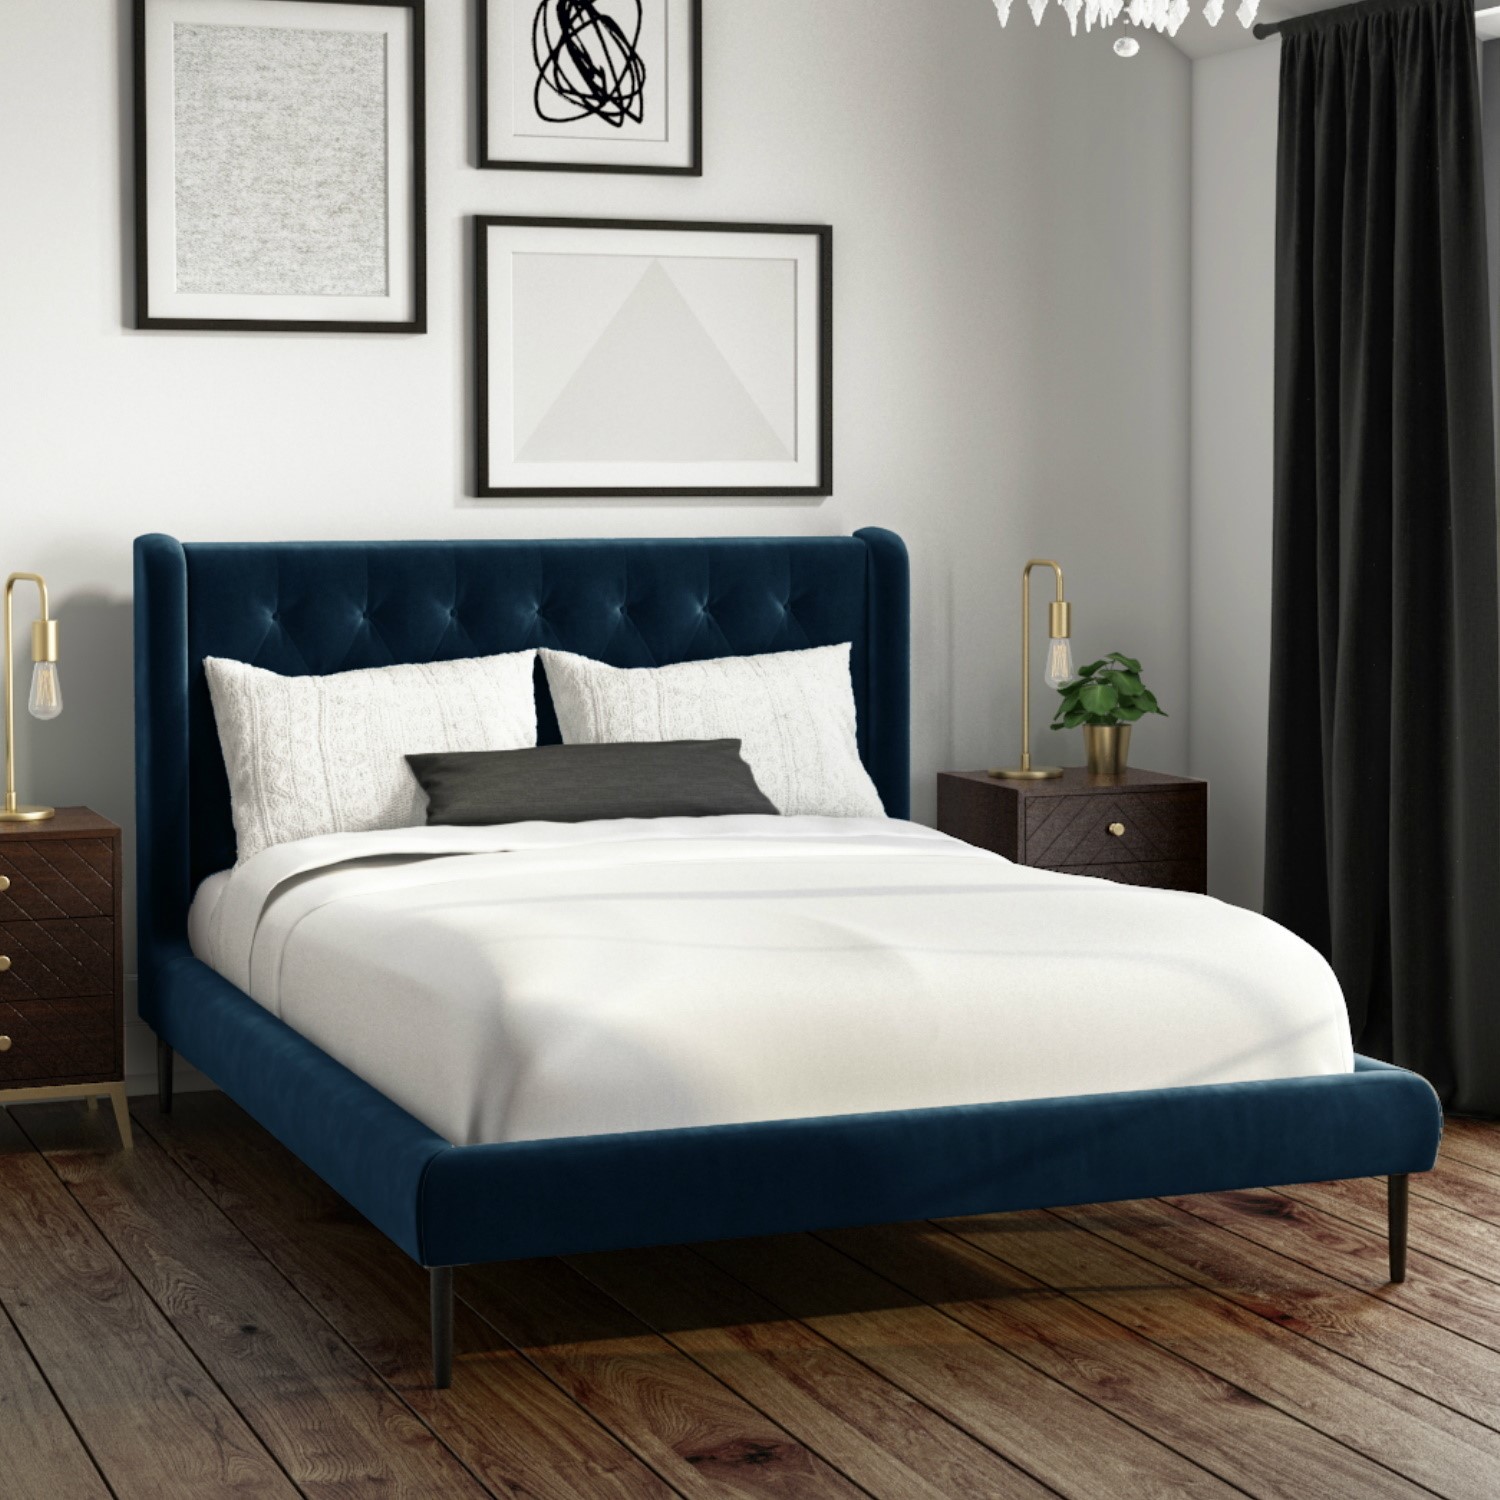 Amara Double Bed Frame In Navy Blue, Blue Double Bed Frame